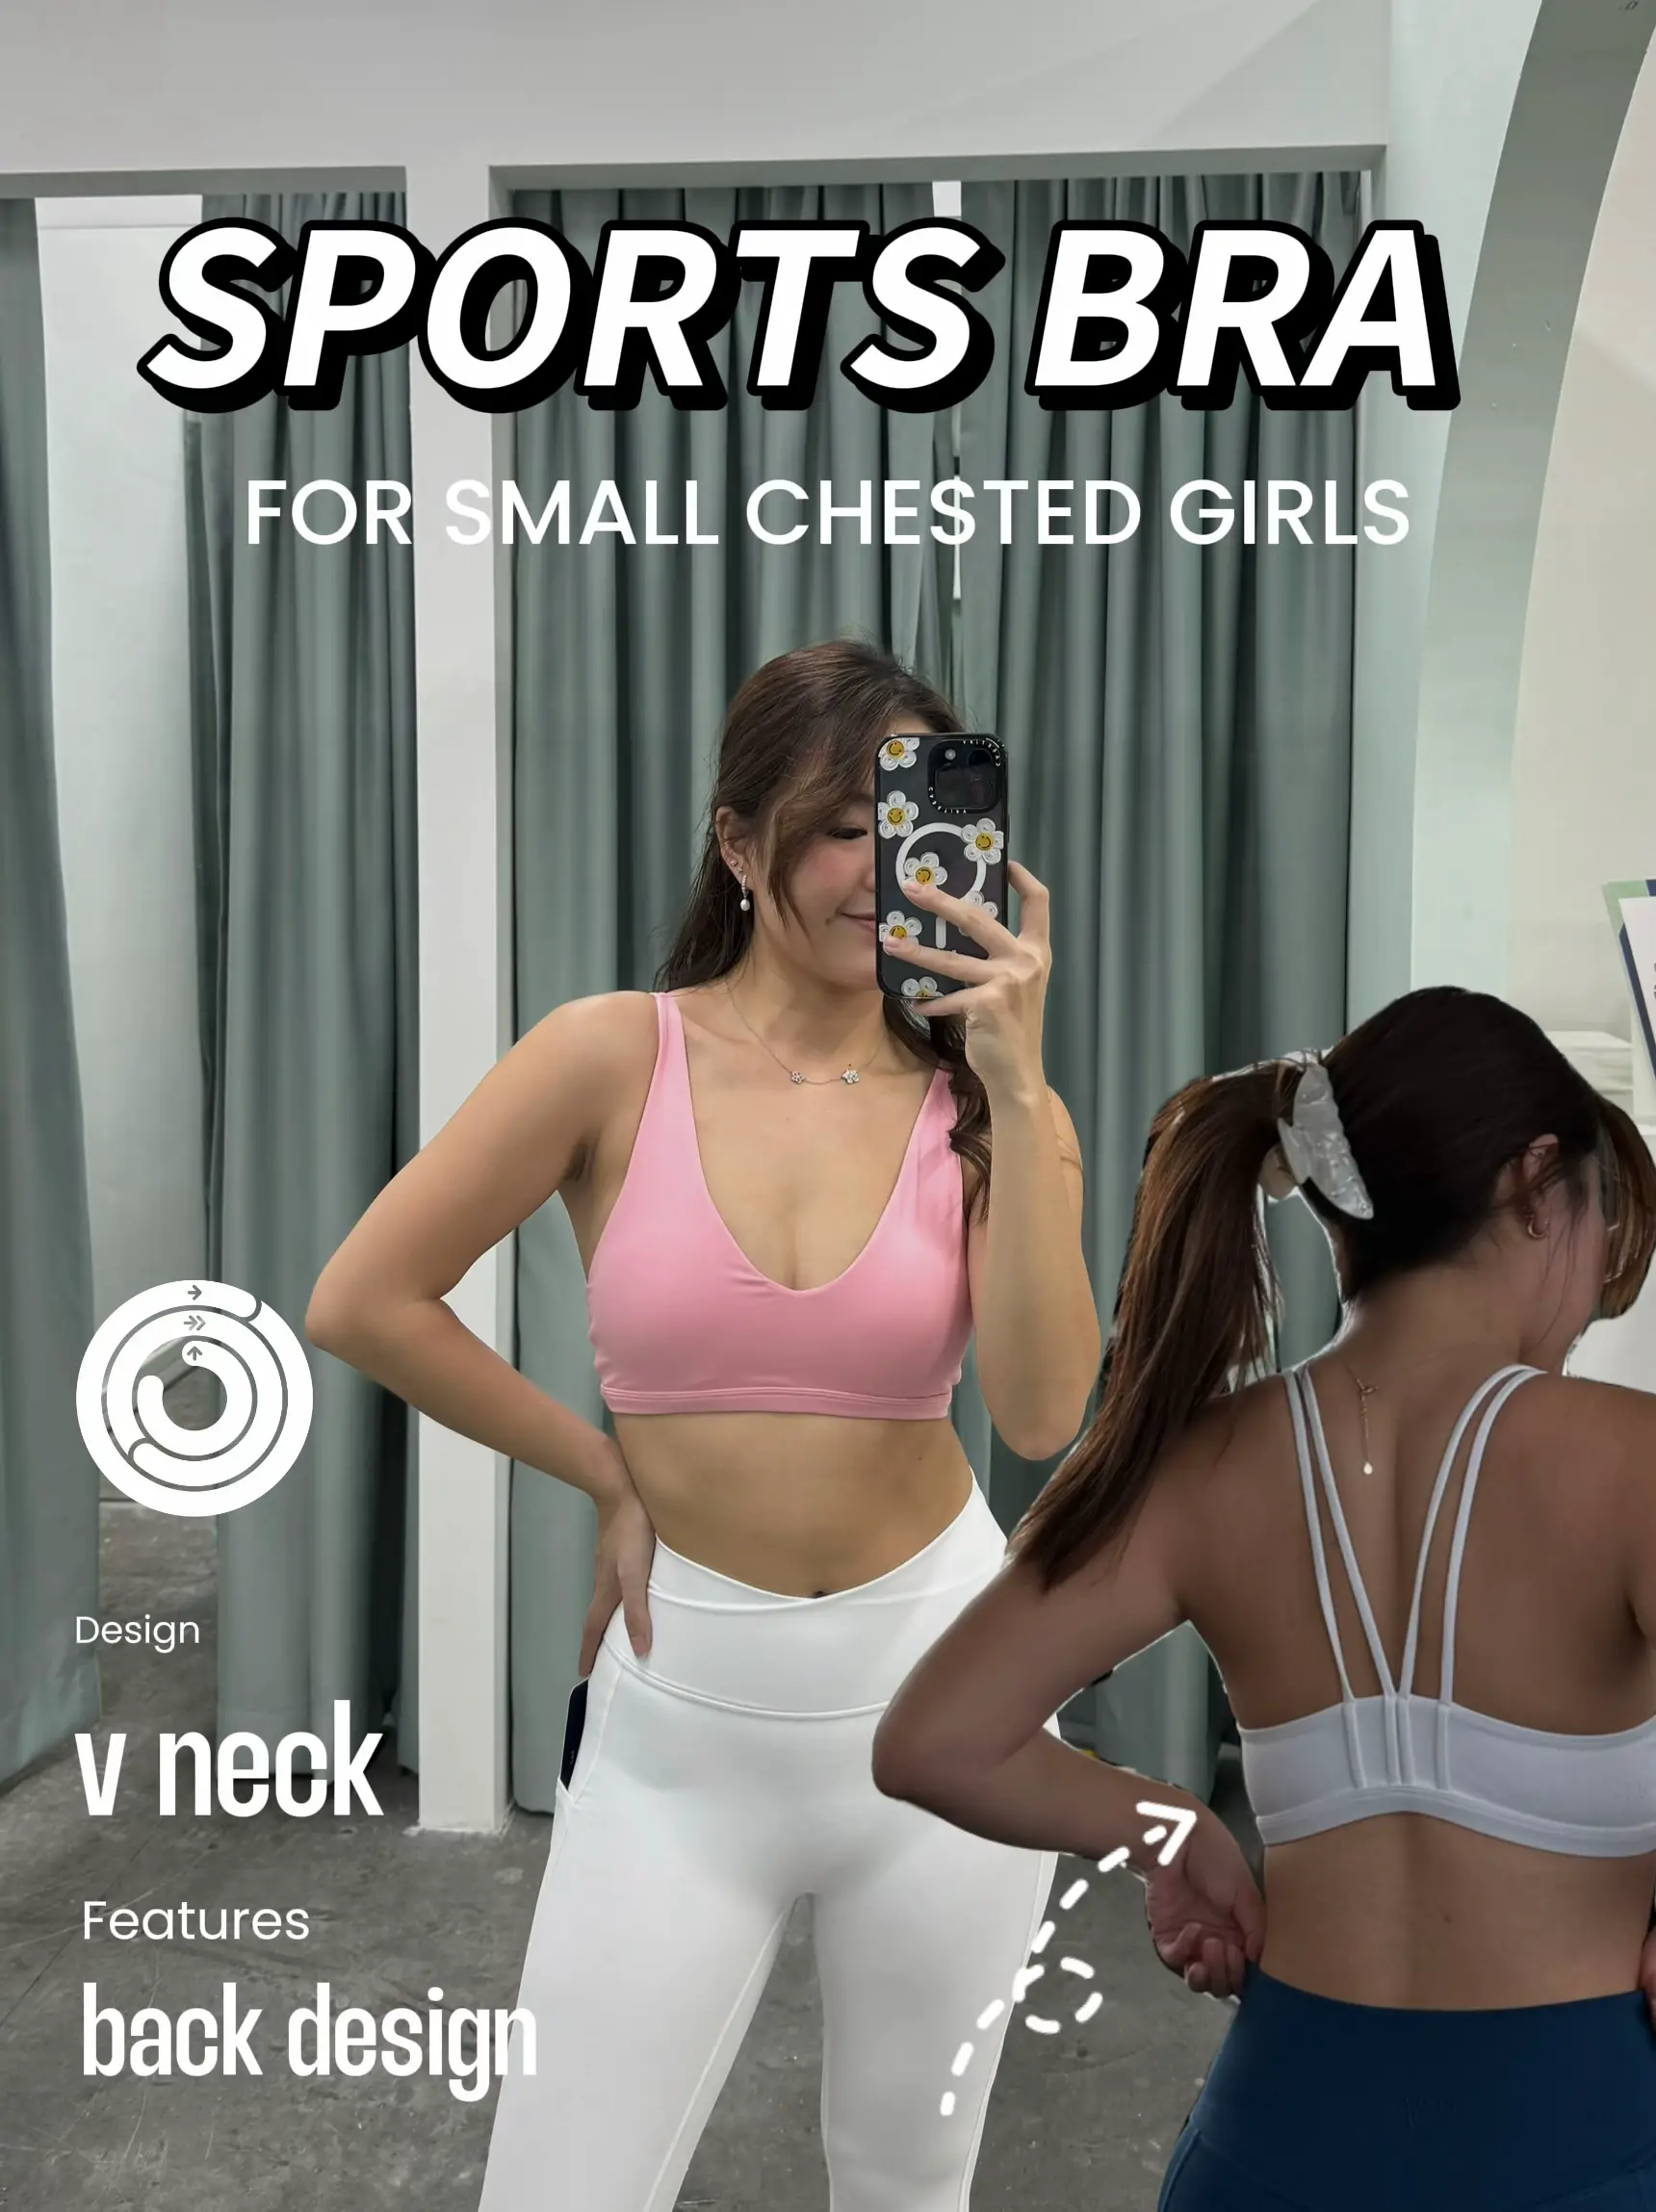 THE BEST SPORTS BRA FOR SMALL CHESTED GIRLS 🏃🏻